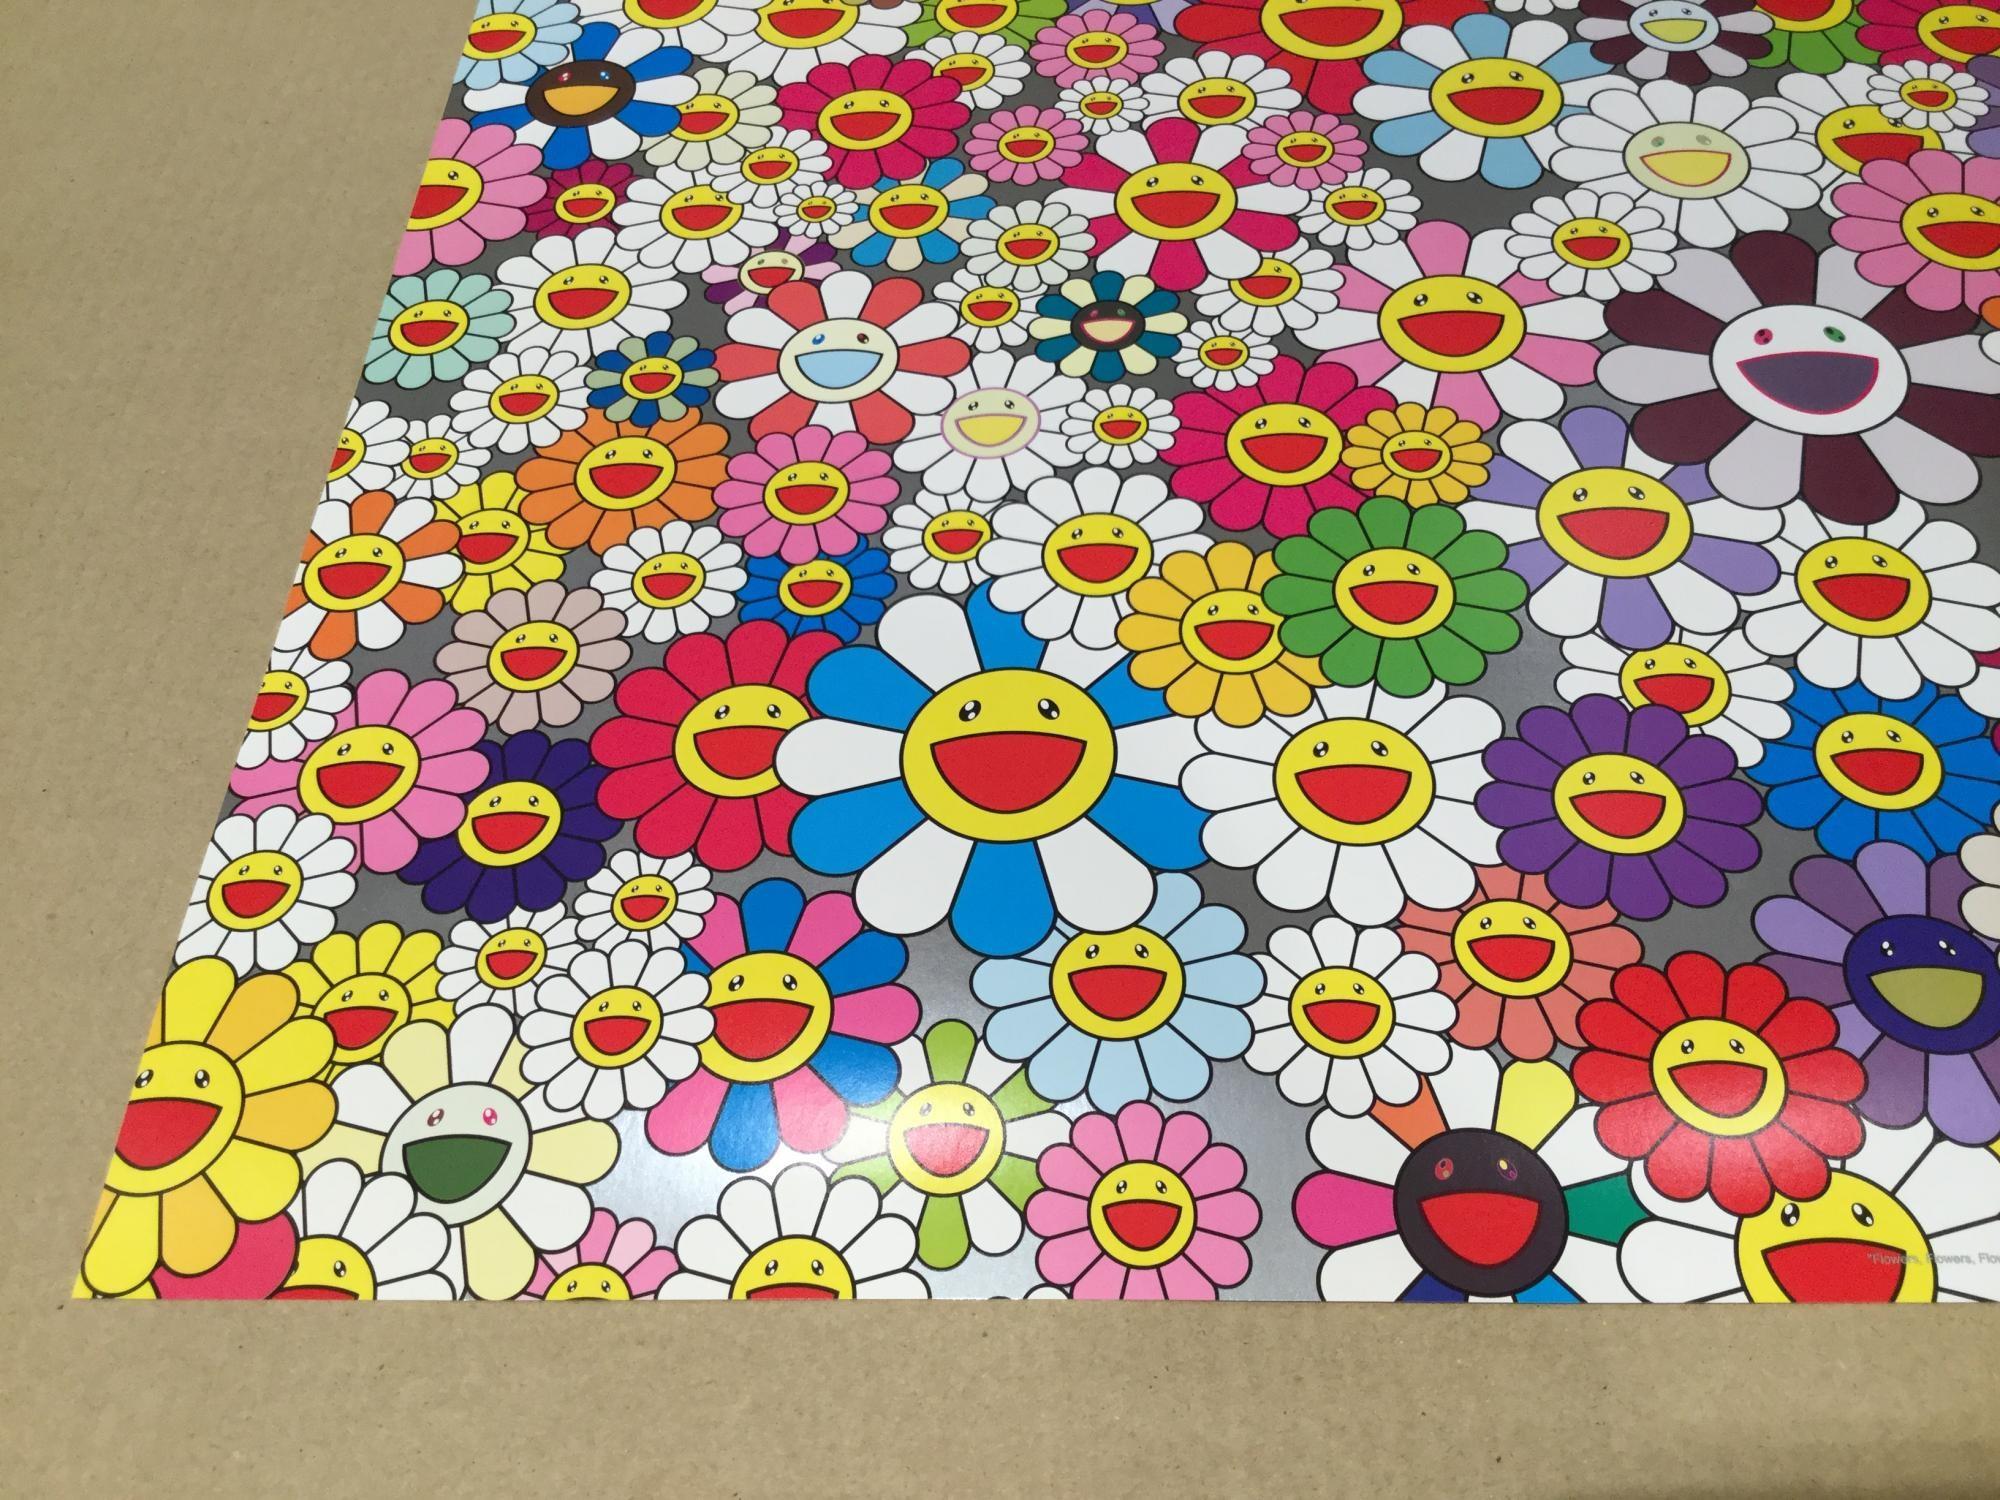 Flowers, Flowers, Flowers. Limited Edition signed and numbered by Murakami - Pop Art Print by Takashi Murakami